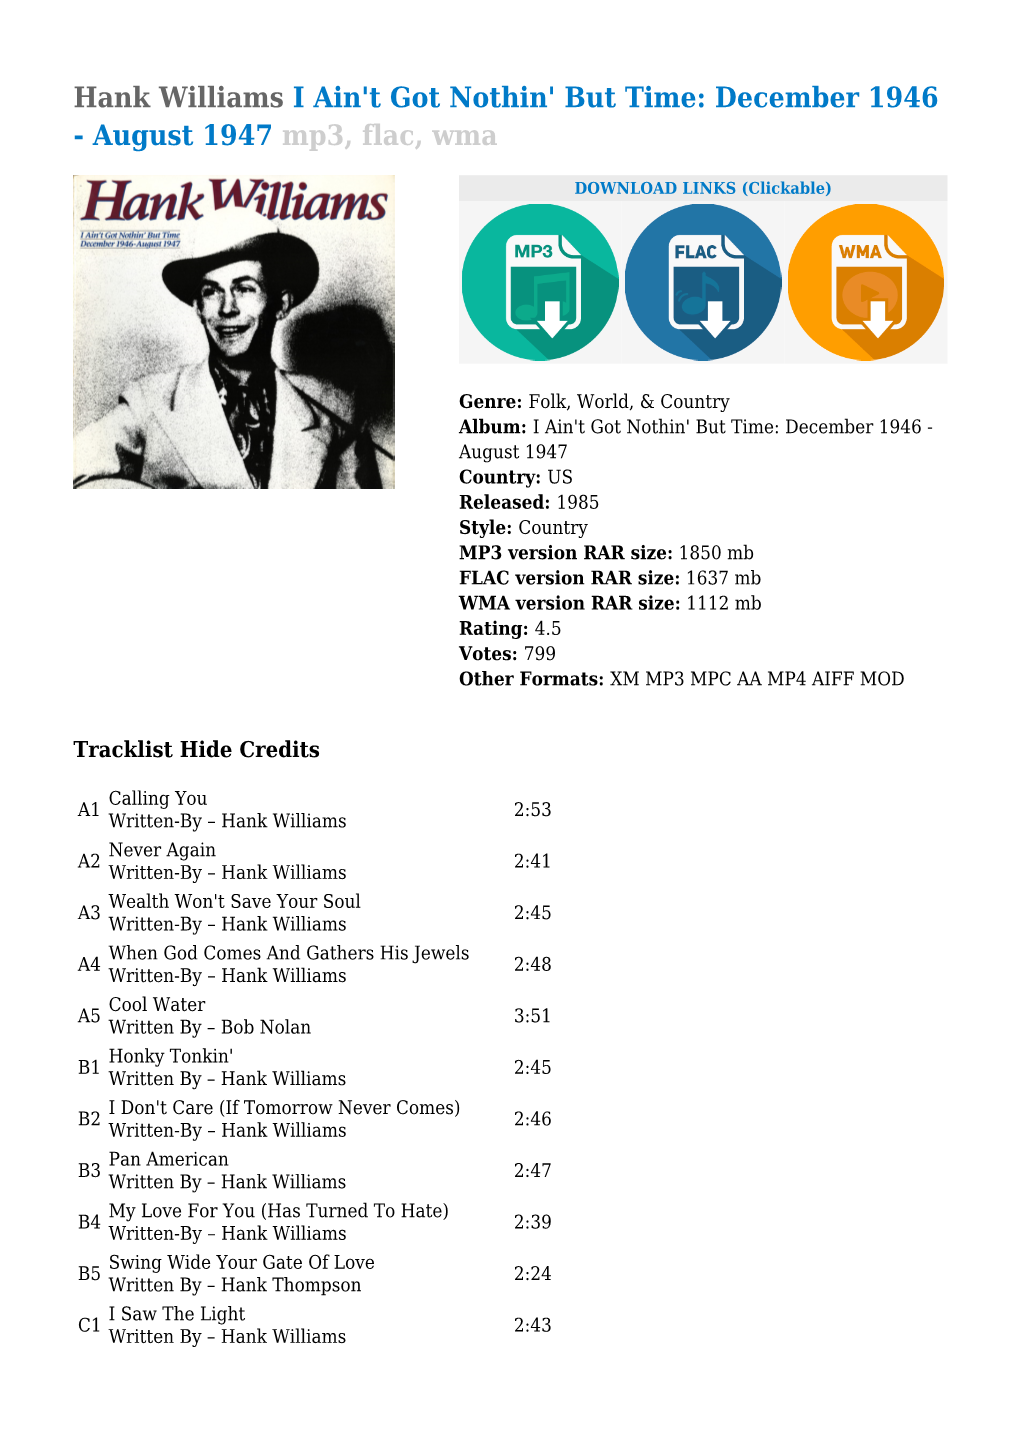 Hank Williams I Ain't Got Nothin' but Time: December 1946 - August 1947 Mp3, Flac, Wma